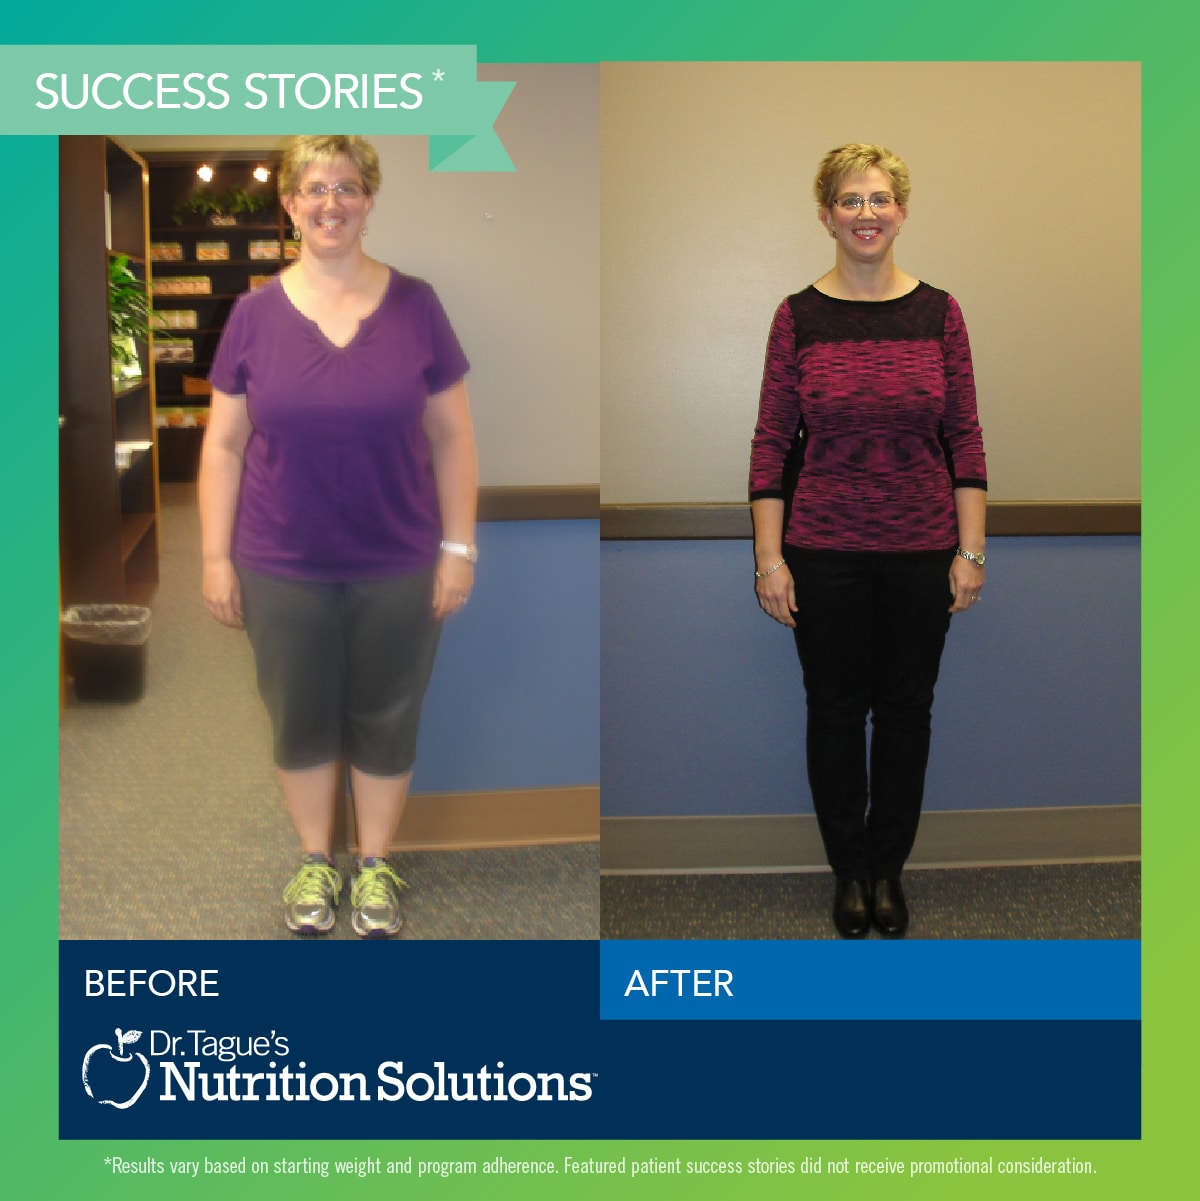 Kathy lost 55lbs. on Dr. Tague's Program!